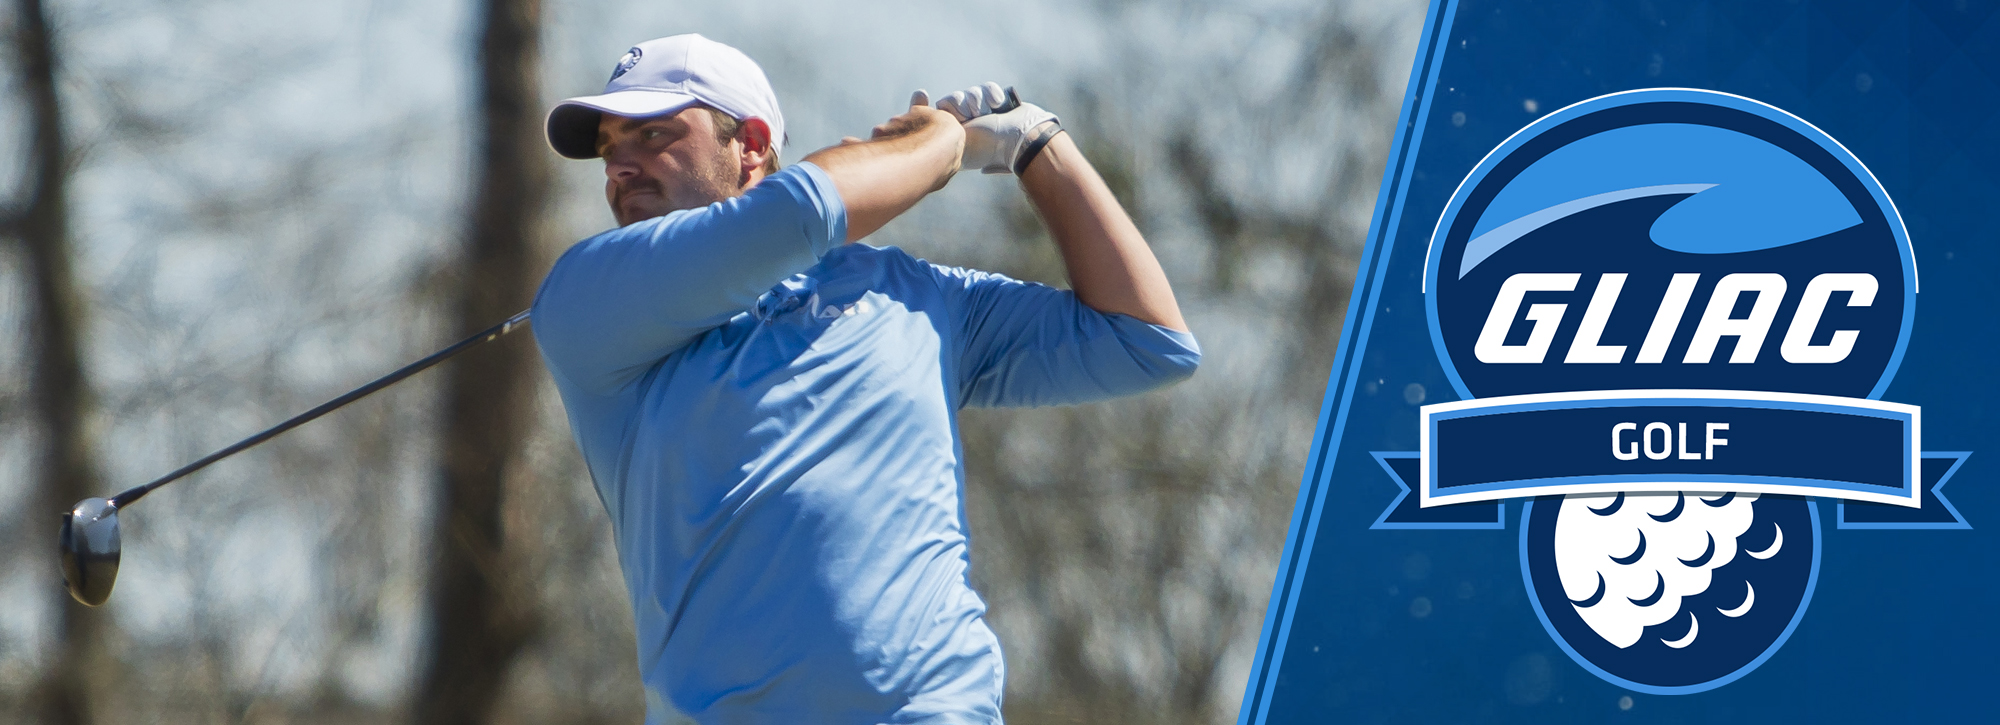 Northwood's Richard takes men's golf player of the week honors